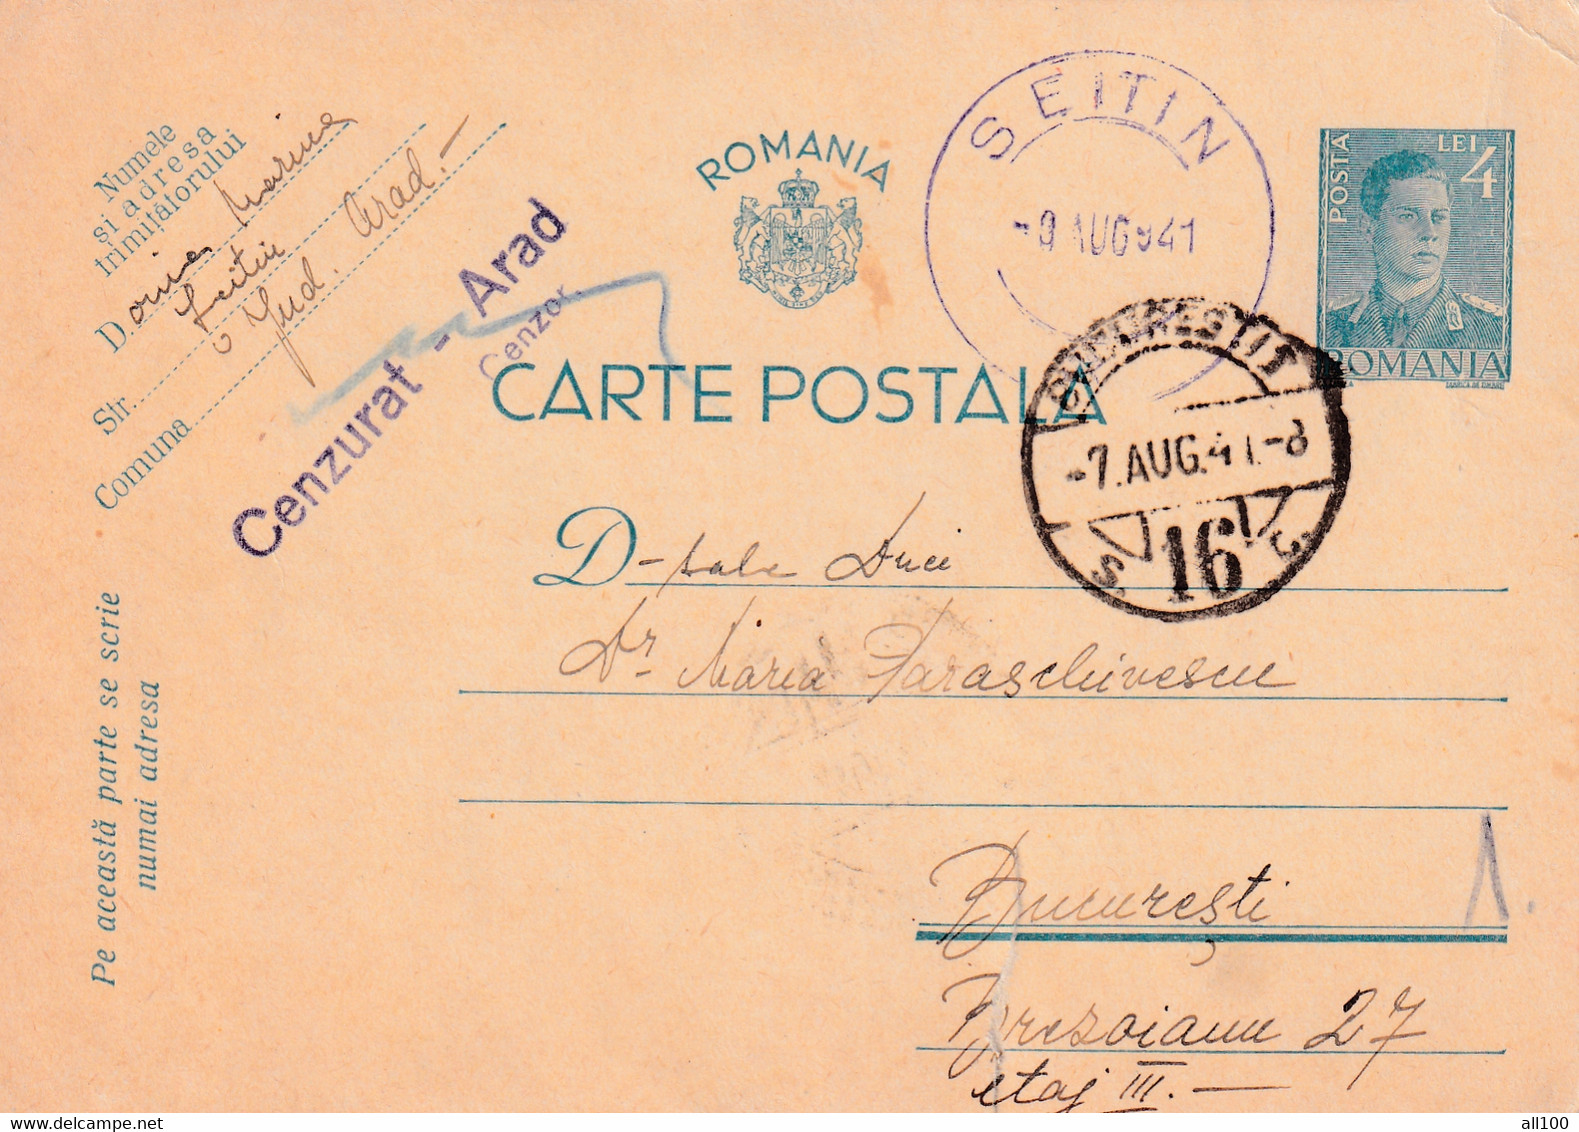 A16413 - MILITARY LETTER CENZURAT CENZORED ARAD SEITIN  KING MICHAEL 4 Lei  POSTAL STATIONERY 1941 - 2. Weltkrieg (Briefe)